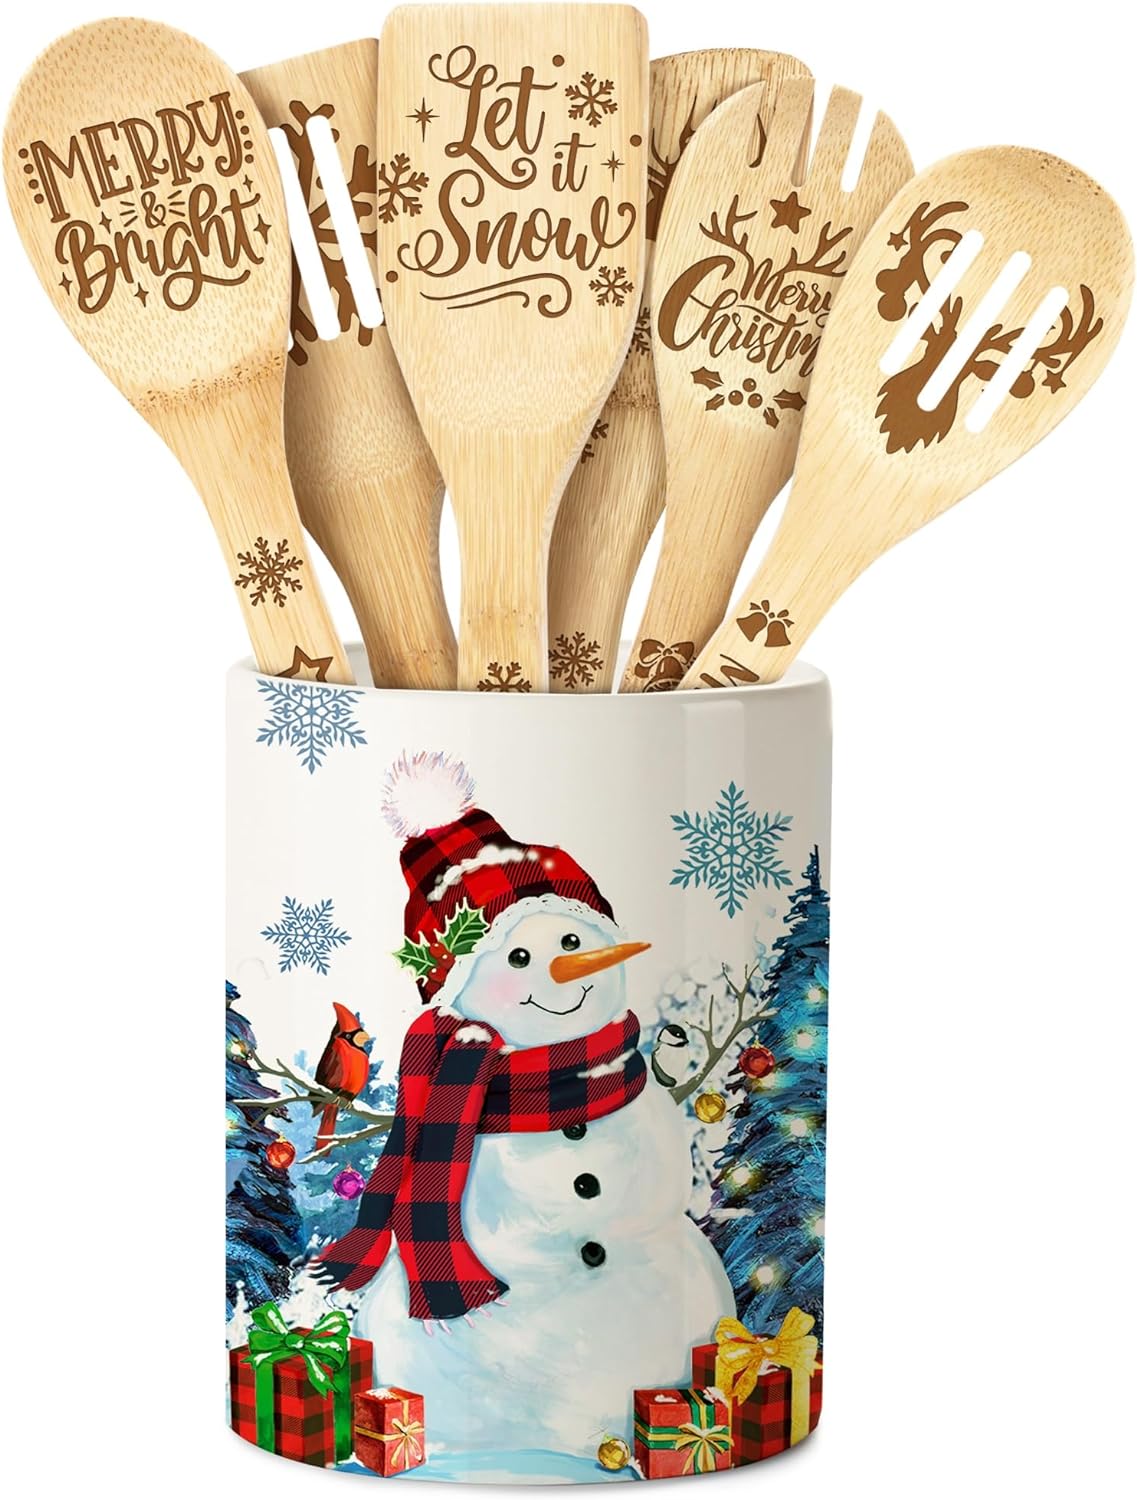 Blue Snowman Christmas Utensil Holder with Bamboo Spoons Set